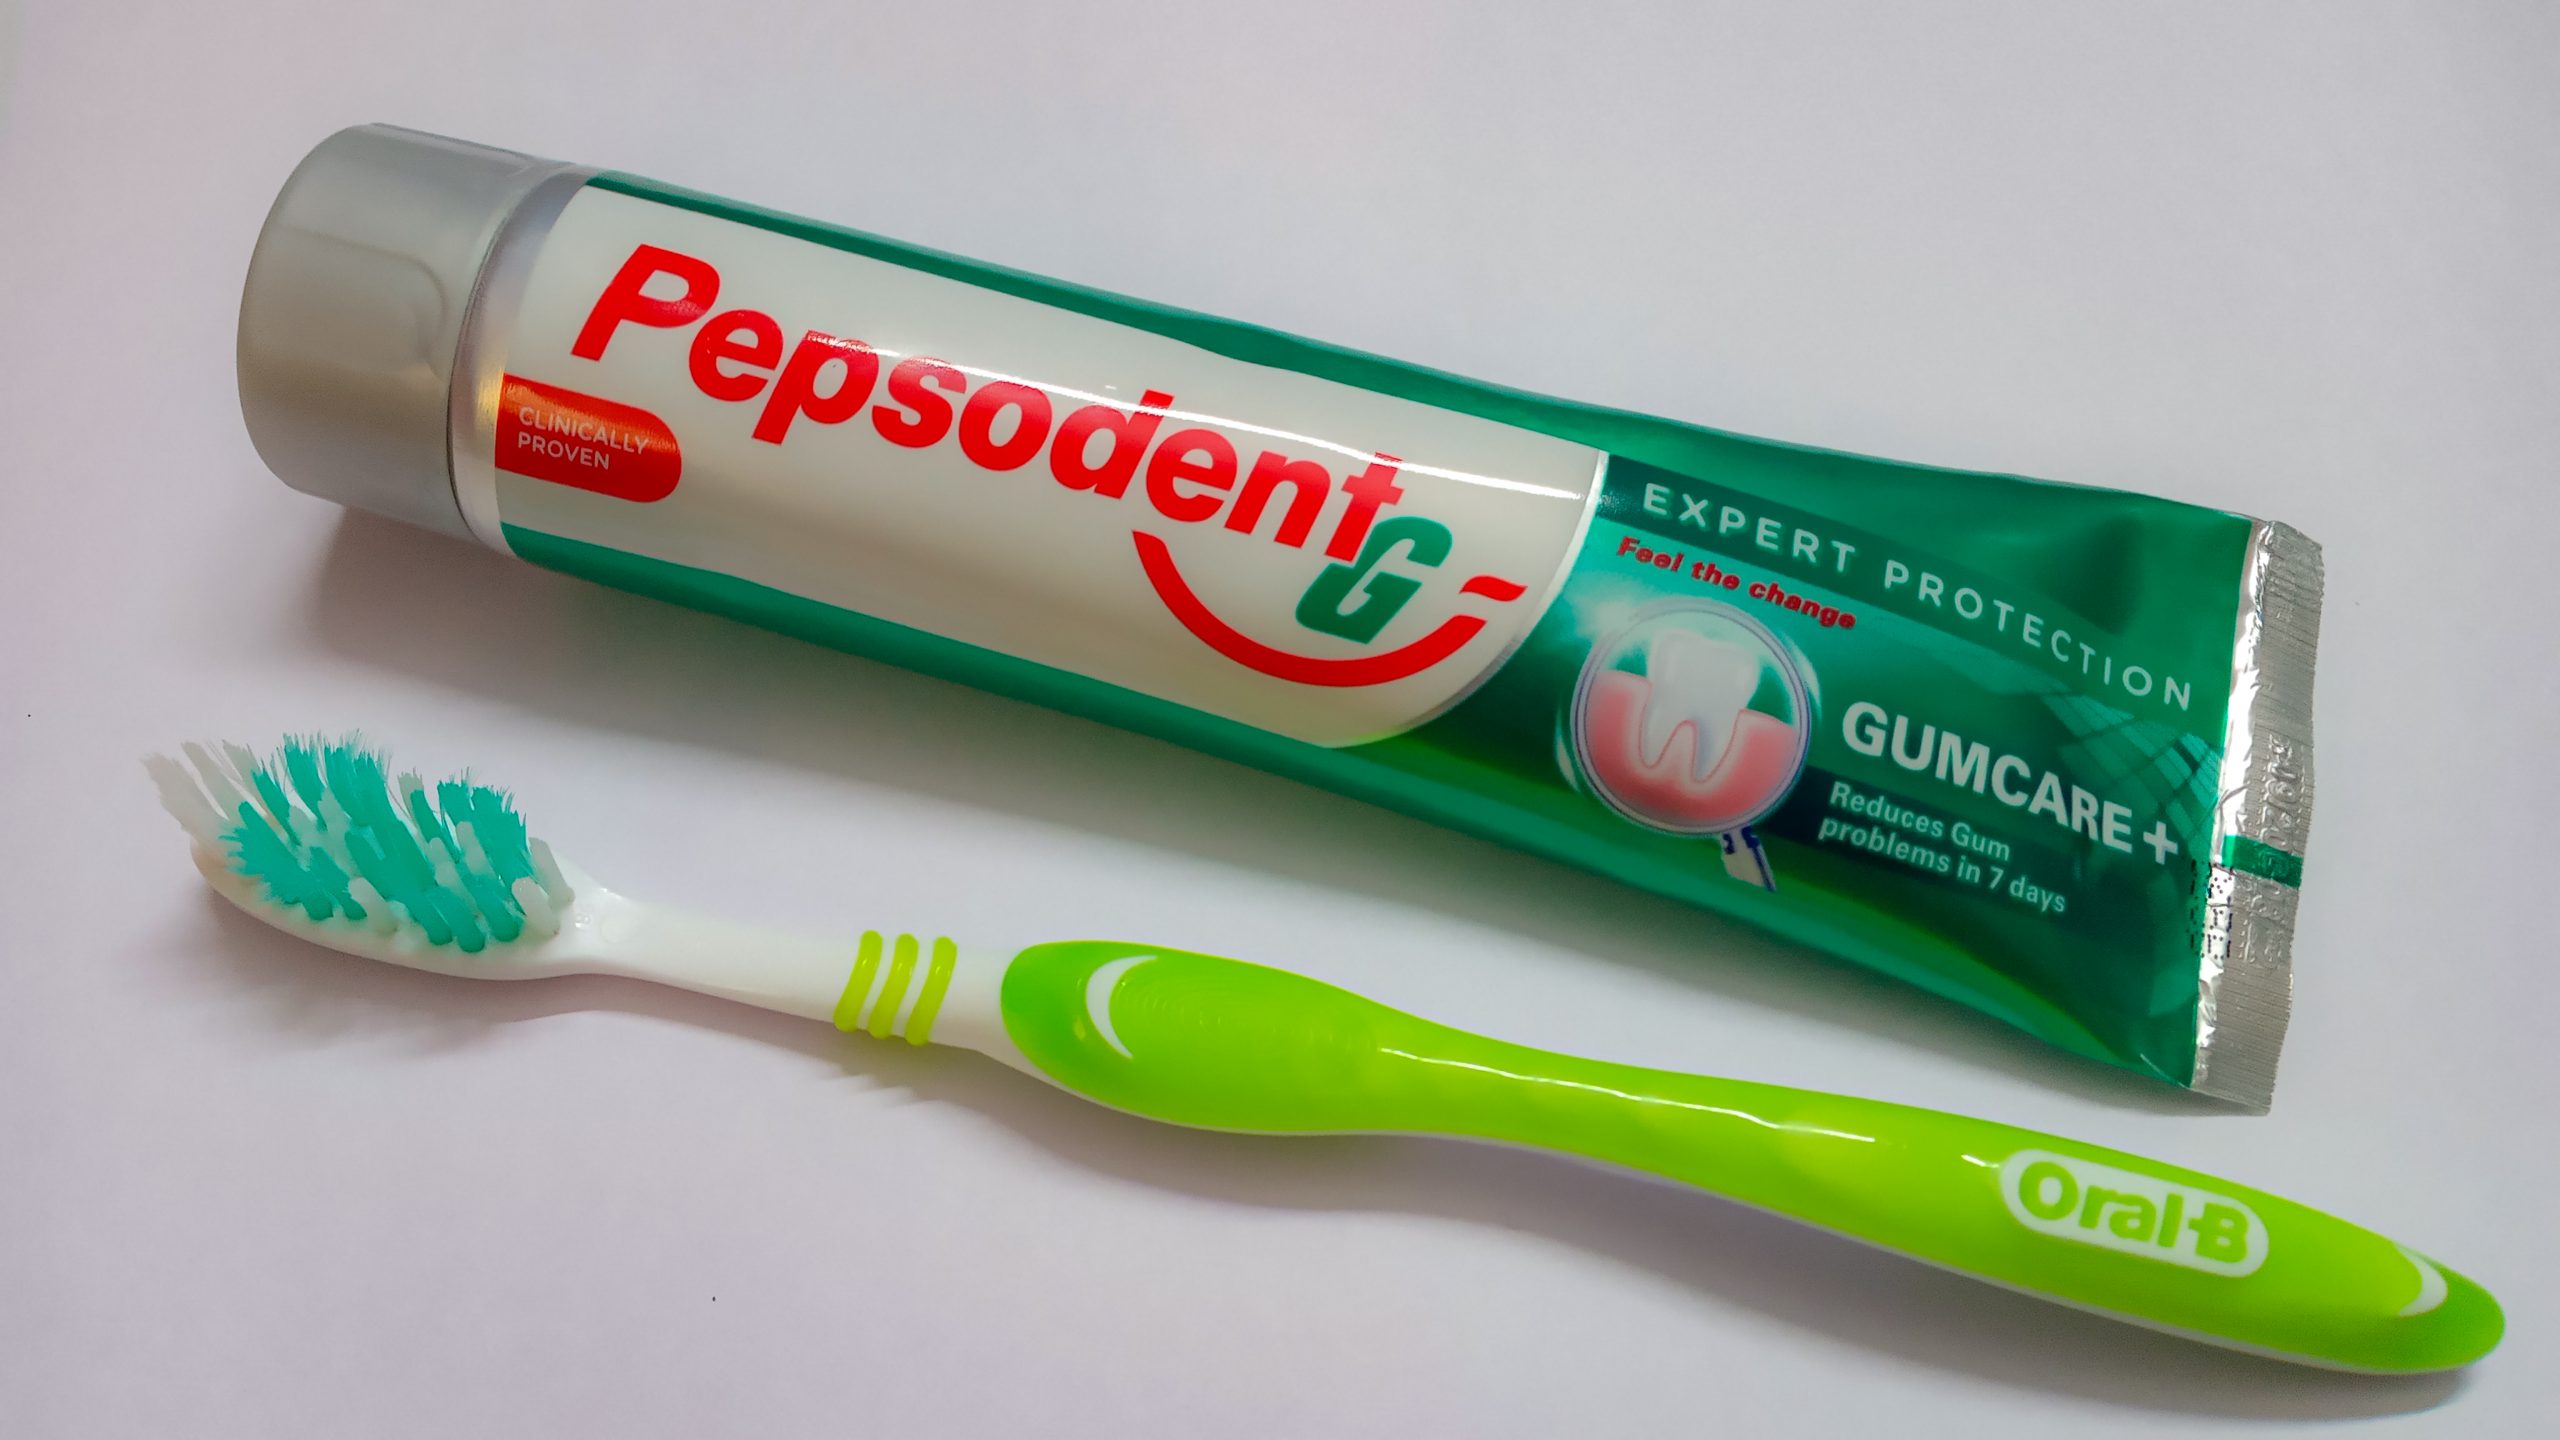 Toothpaste and brush for dental care